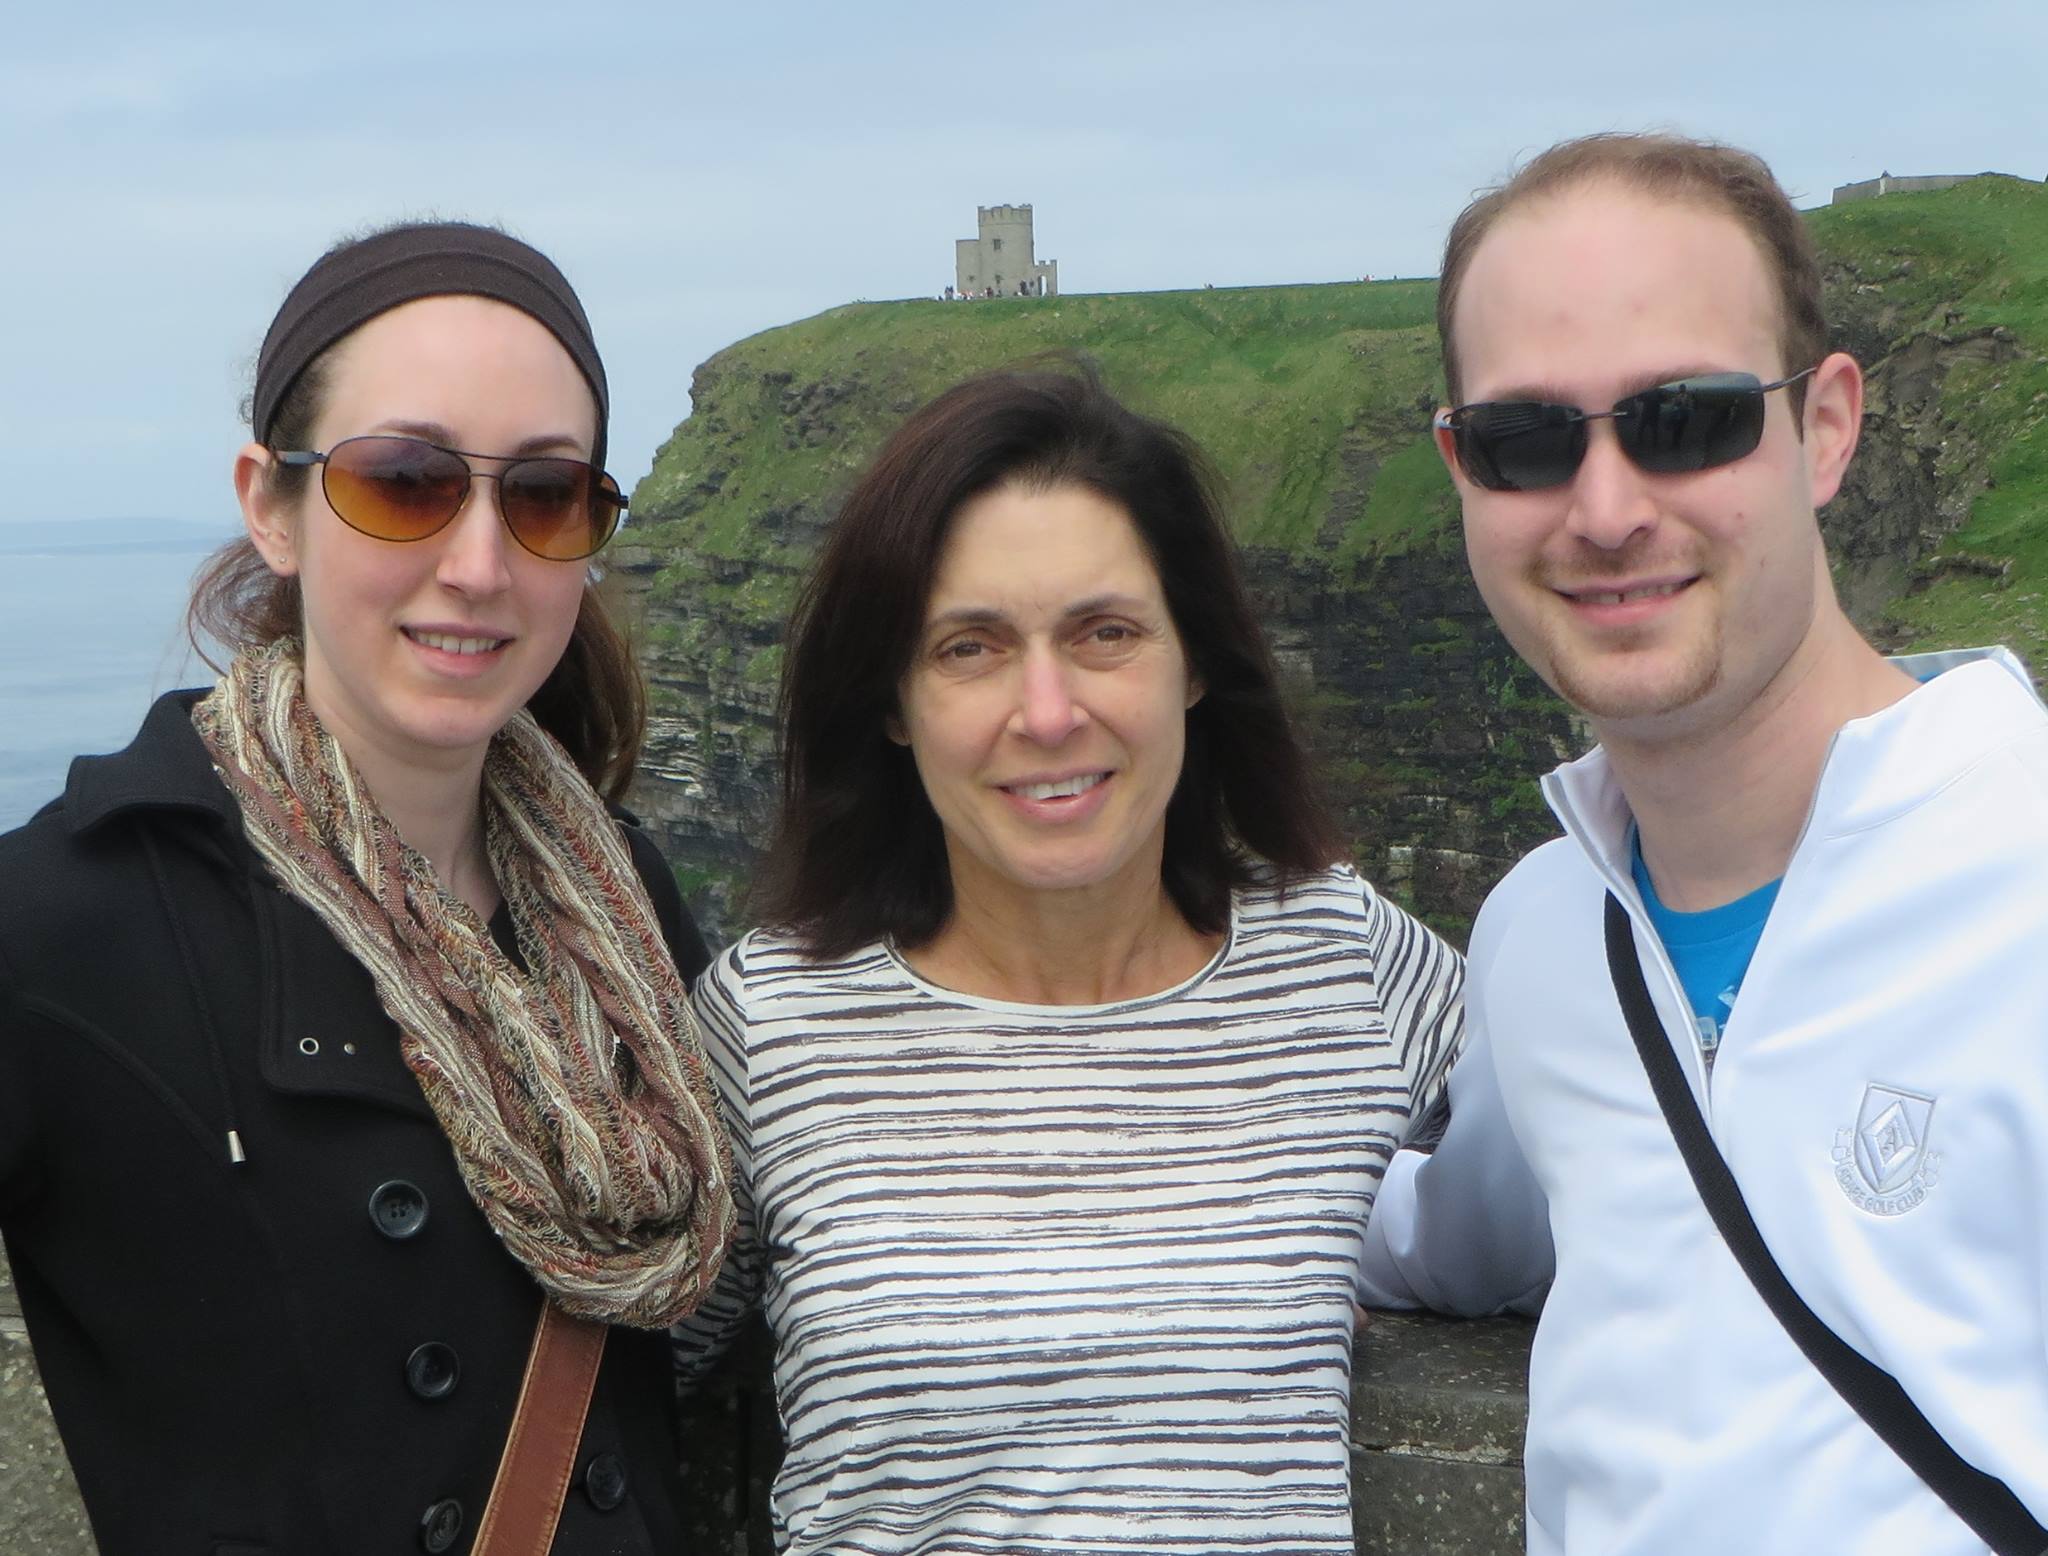 Two women and a man on a hill in Ireland